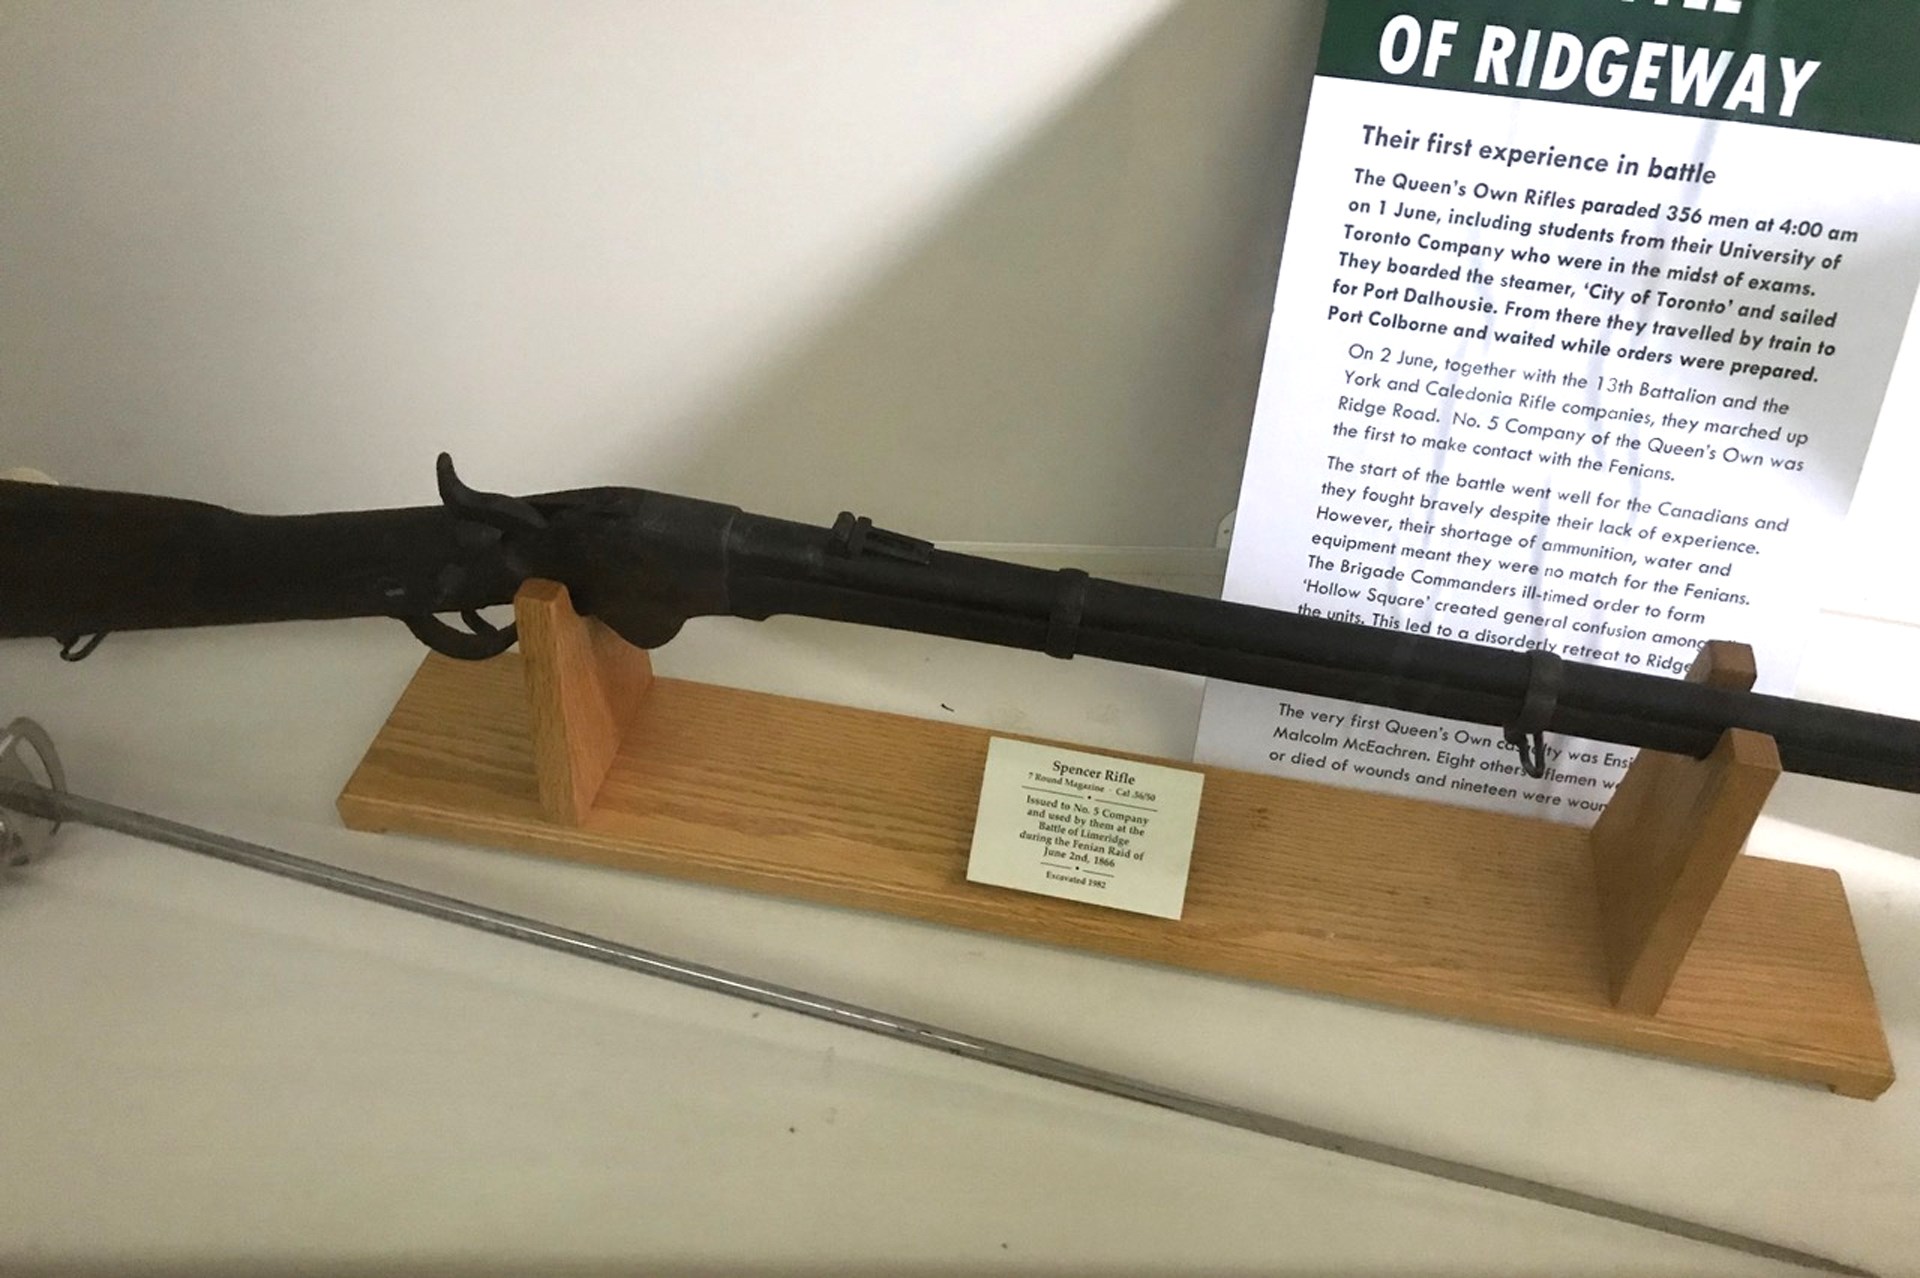 This “excavated” M1865 Spencer rifle in the QOR Museum was not recovered from the Ridgeway battlefield, but rather from Lake Ontaria along Toronto’s waterfront, and it was not one of the 40 Spencer rifles issued to Number 5 Company, Queen’s Own Rifles in June 1866. Image courtesy of Owen Conner.